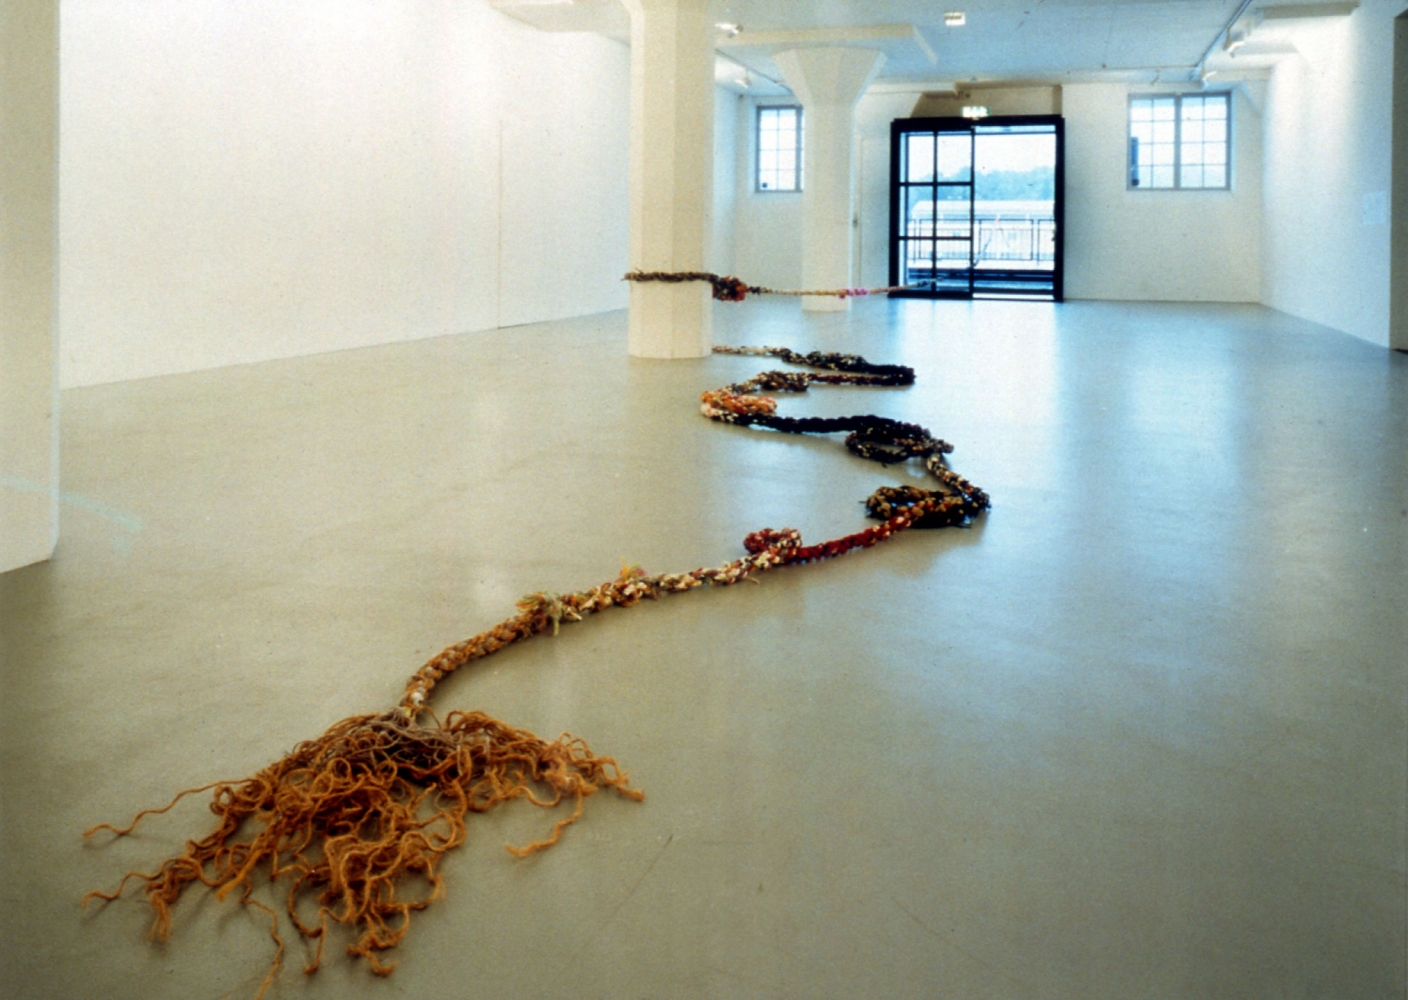 Janine Antoni
Moor, 2001
Mixed media installation, material provided by family and friends
Dimensions variable
Images courtesy of Magasin III